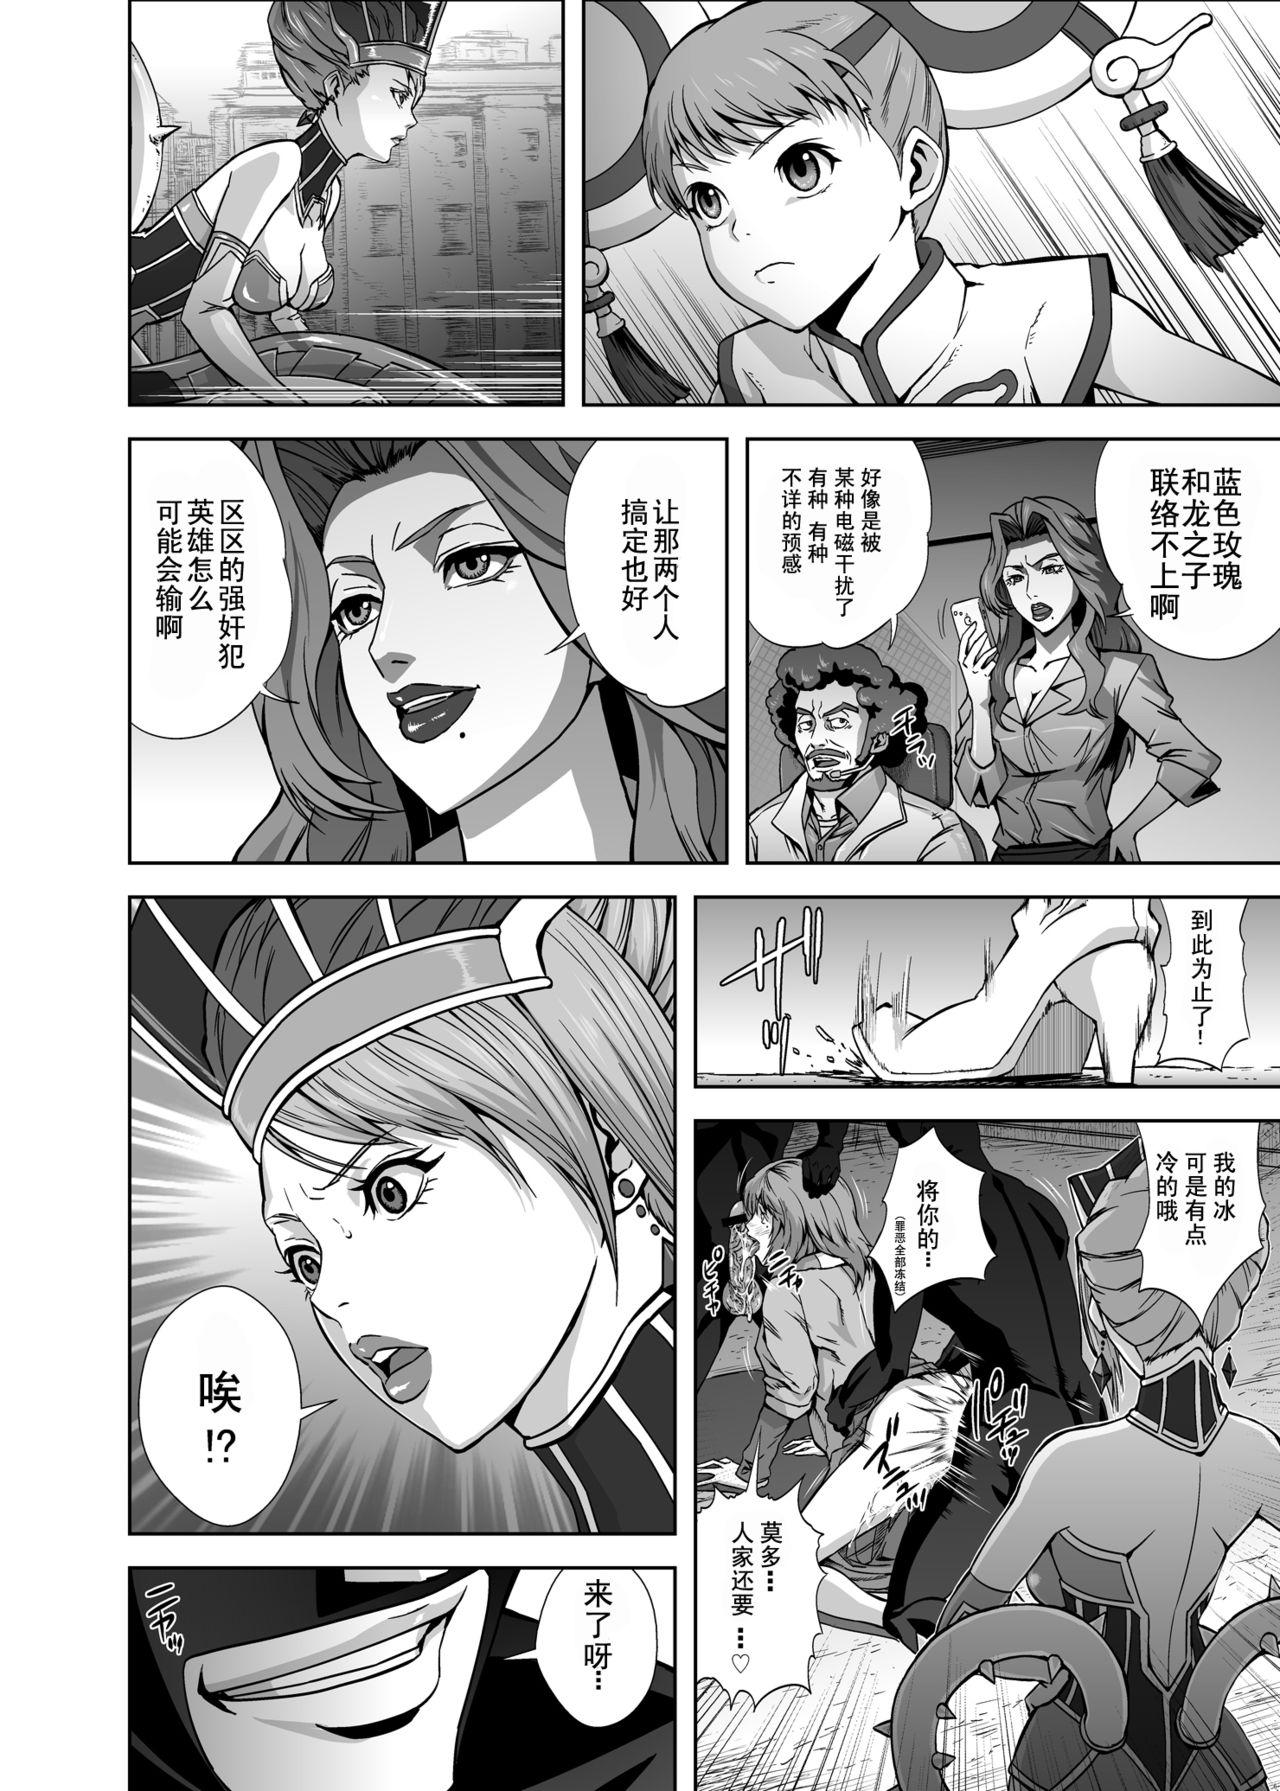 Analfucking DRAGON & ROSE - Tiger and bunny Spy Cam - Page 5